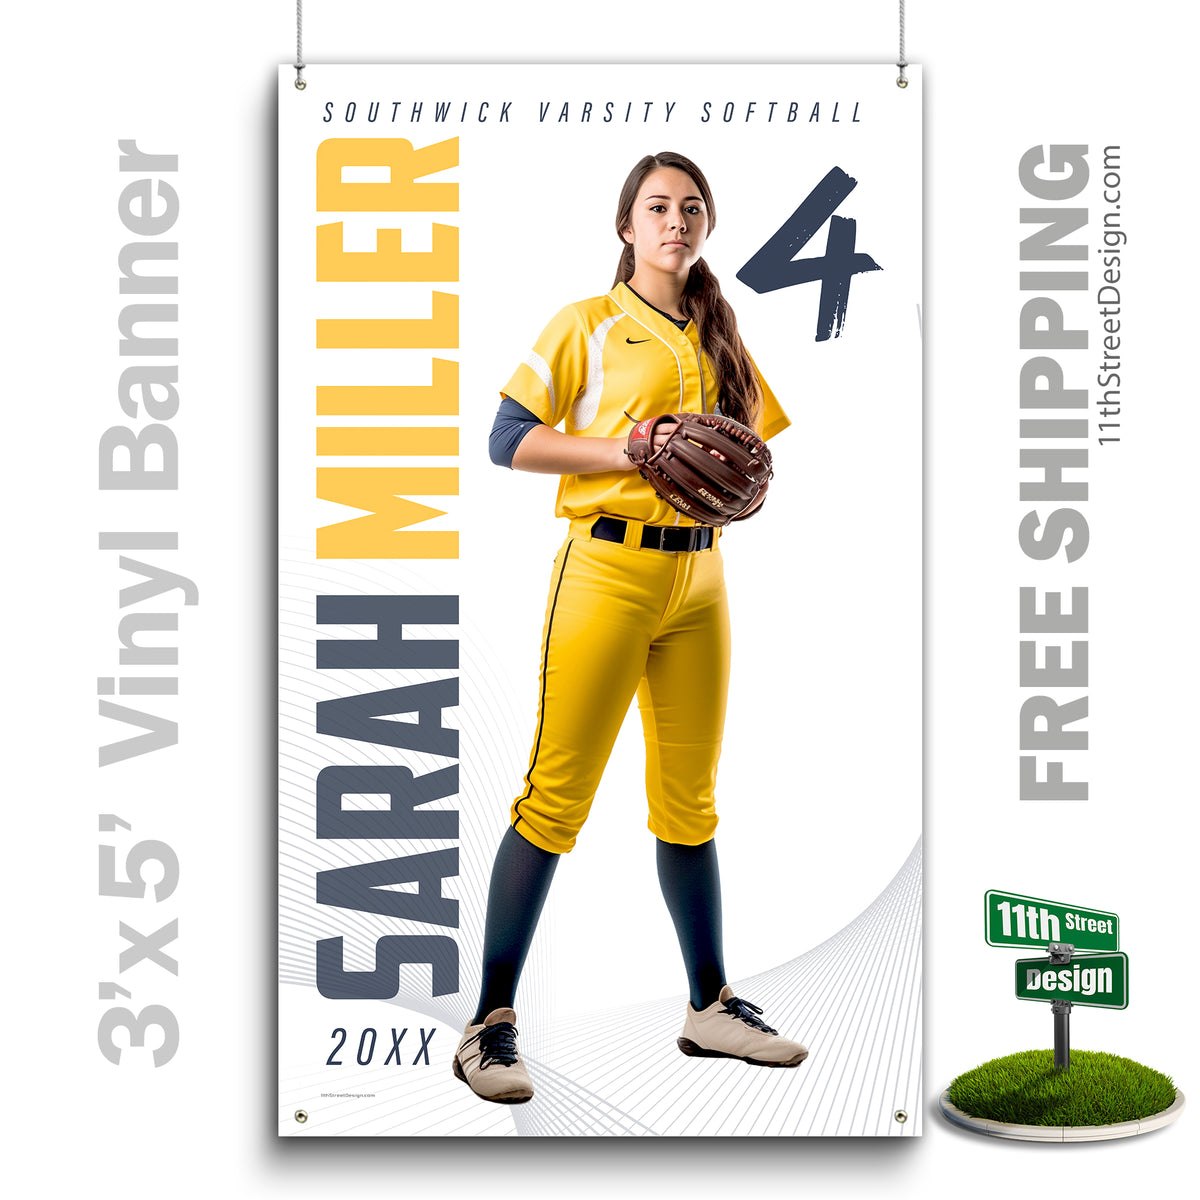 Coaches Gift, Team Gifts, Poster Print, Personalized Poster, Senior Night, Senior Poster, Sport Gift, Sports Collage, Sports Prints, Custom Sports Poster, Softball Poster, Softball Print, Softball Senior,